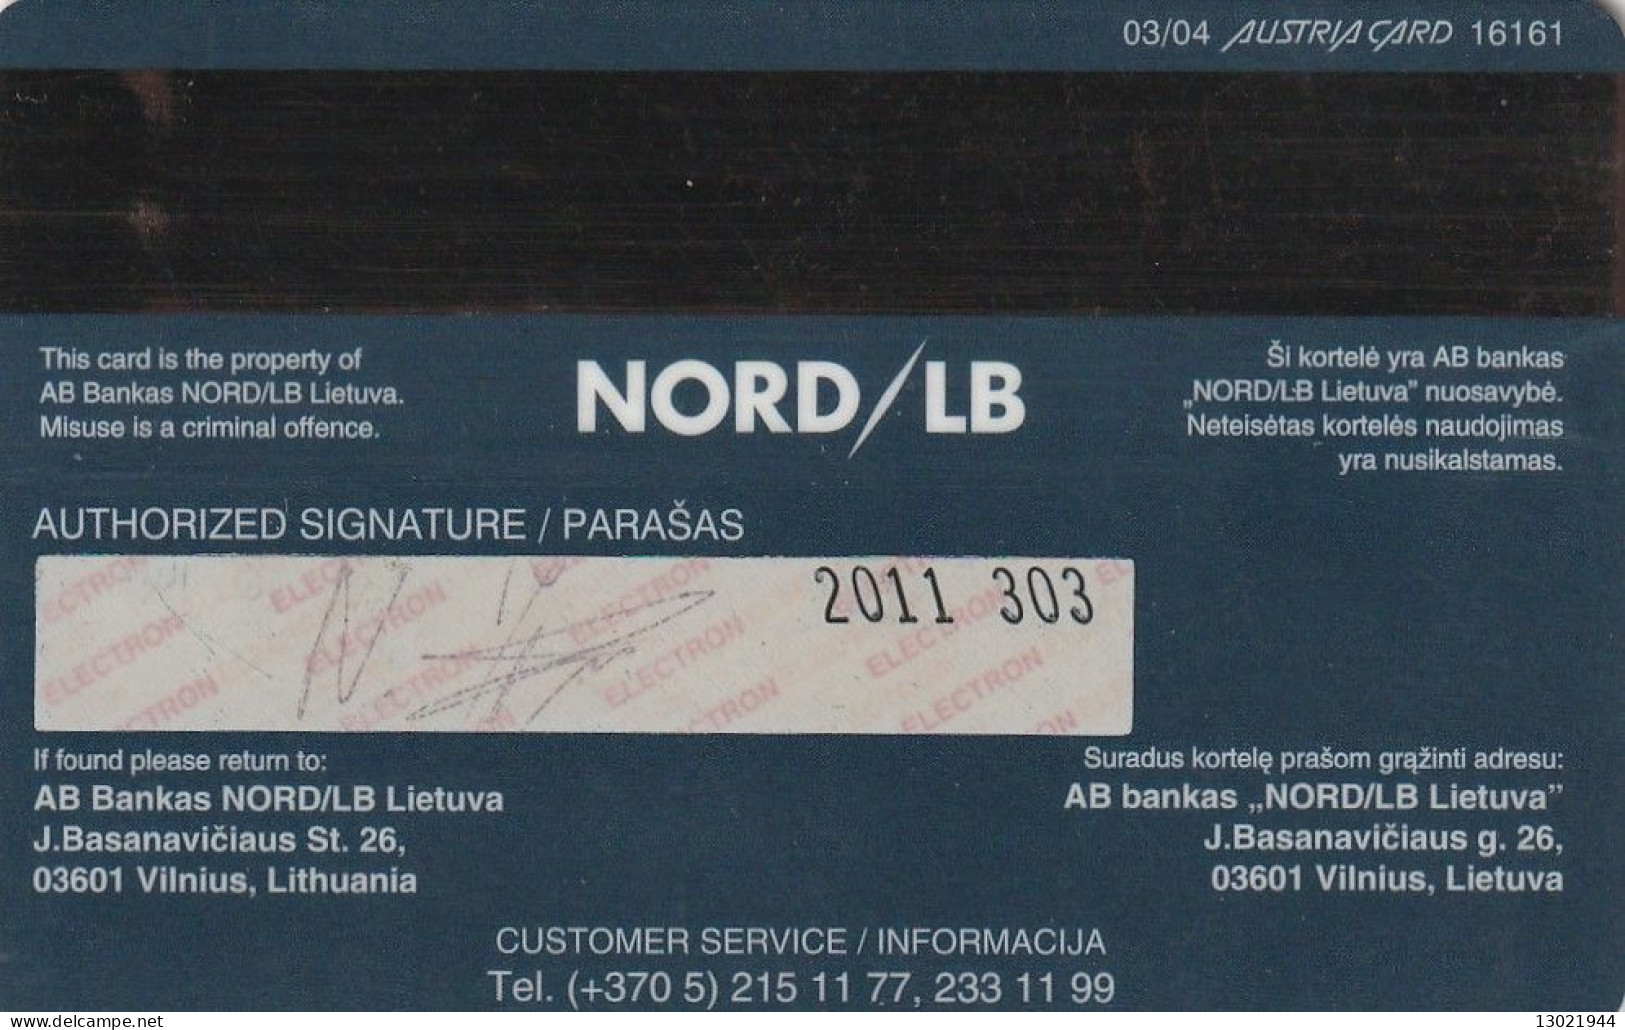 N.4 LITUANIA BANK  CARDS - POSSIBLE SALE OF SINGLE CARDS - Credit Cards (Exp. Date Min. 10 Years)